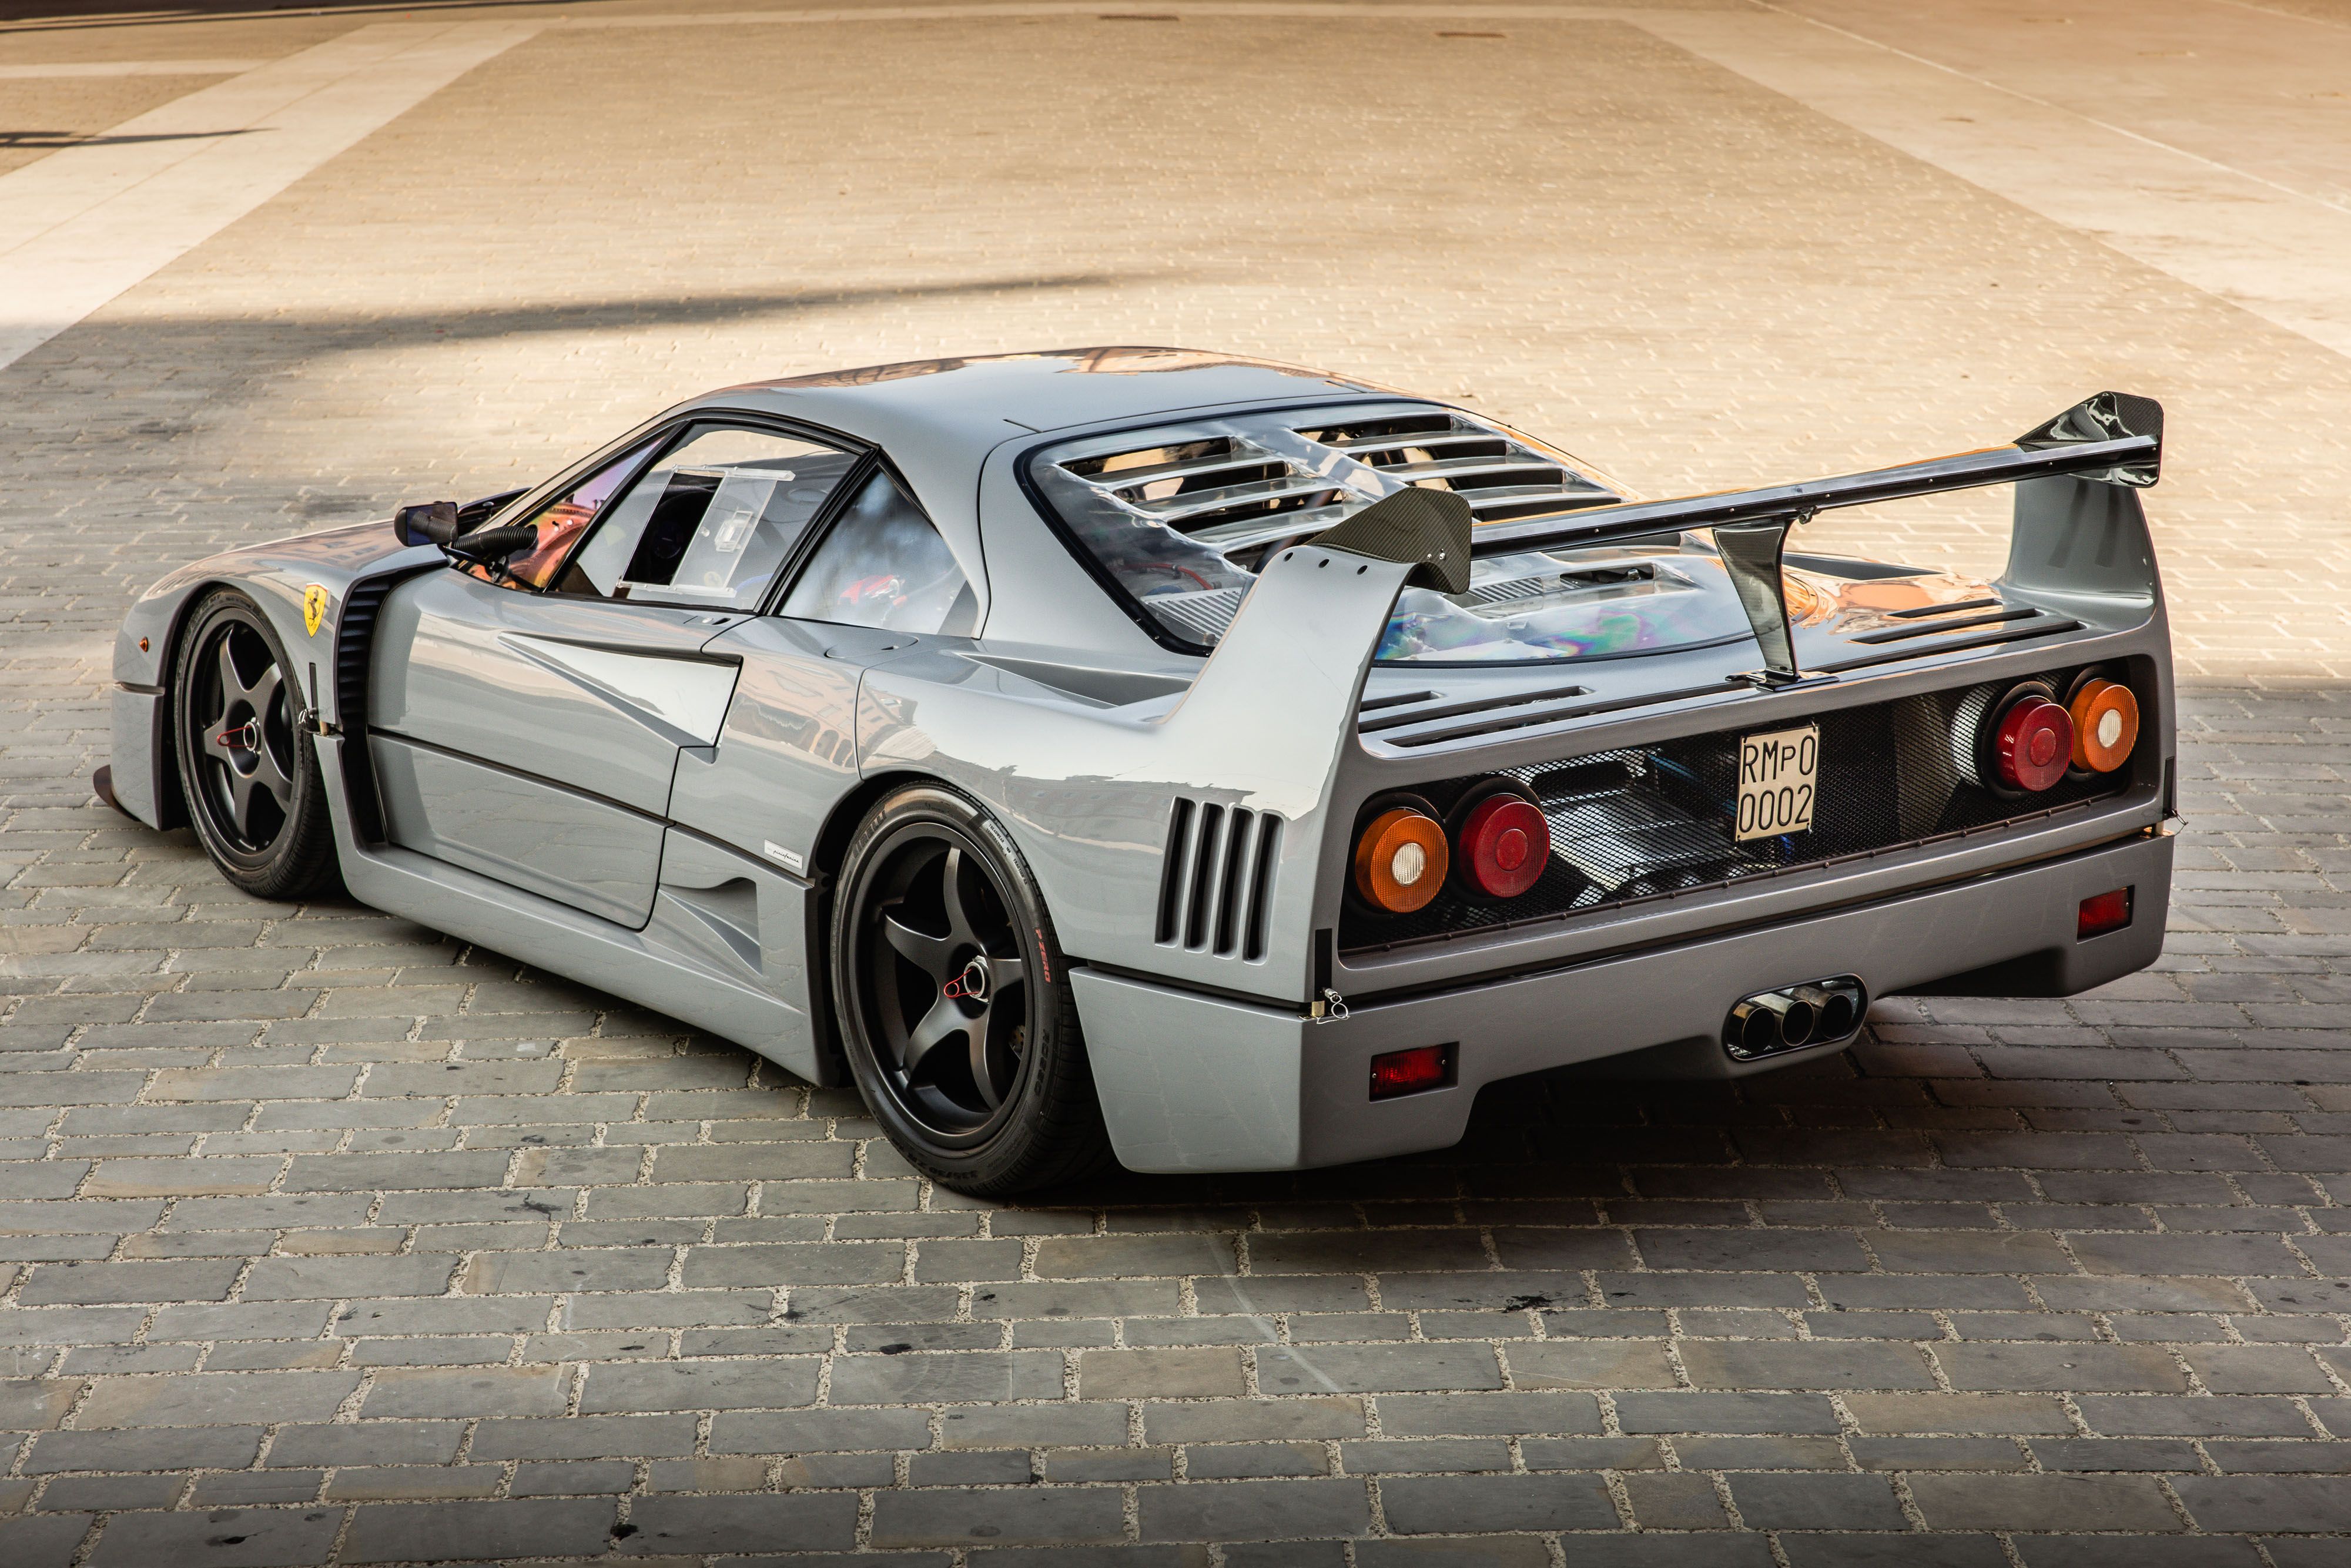 This 1,000-HP Ferrari F40 Competizione Is as Unique as it is Special